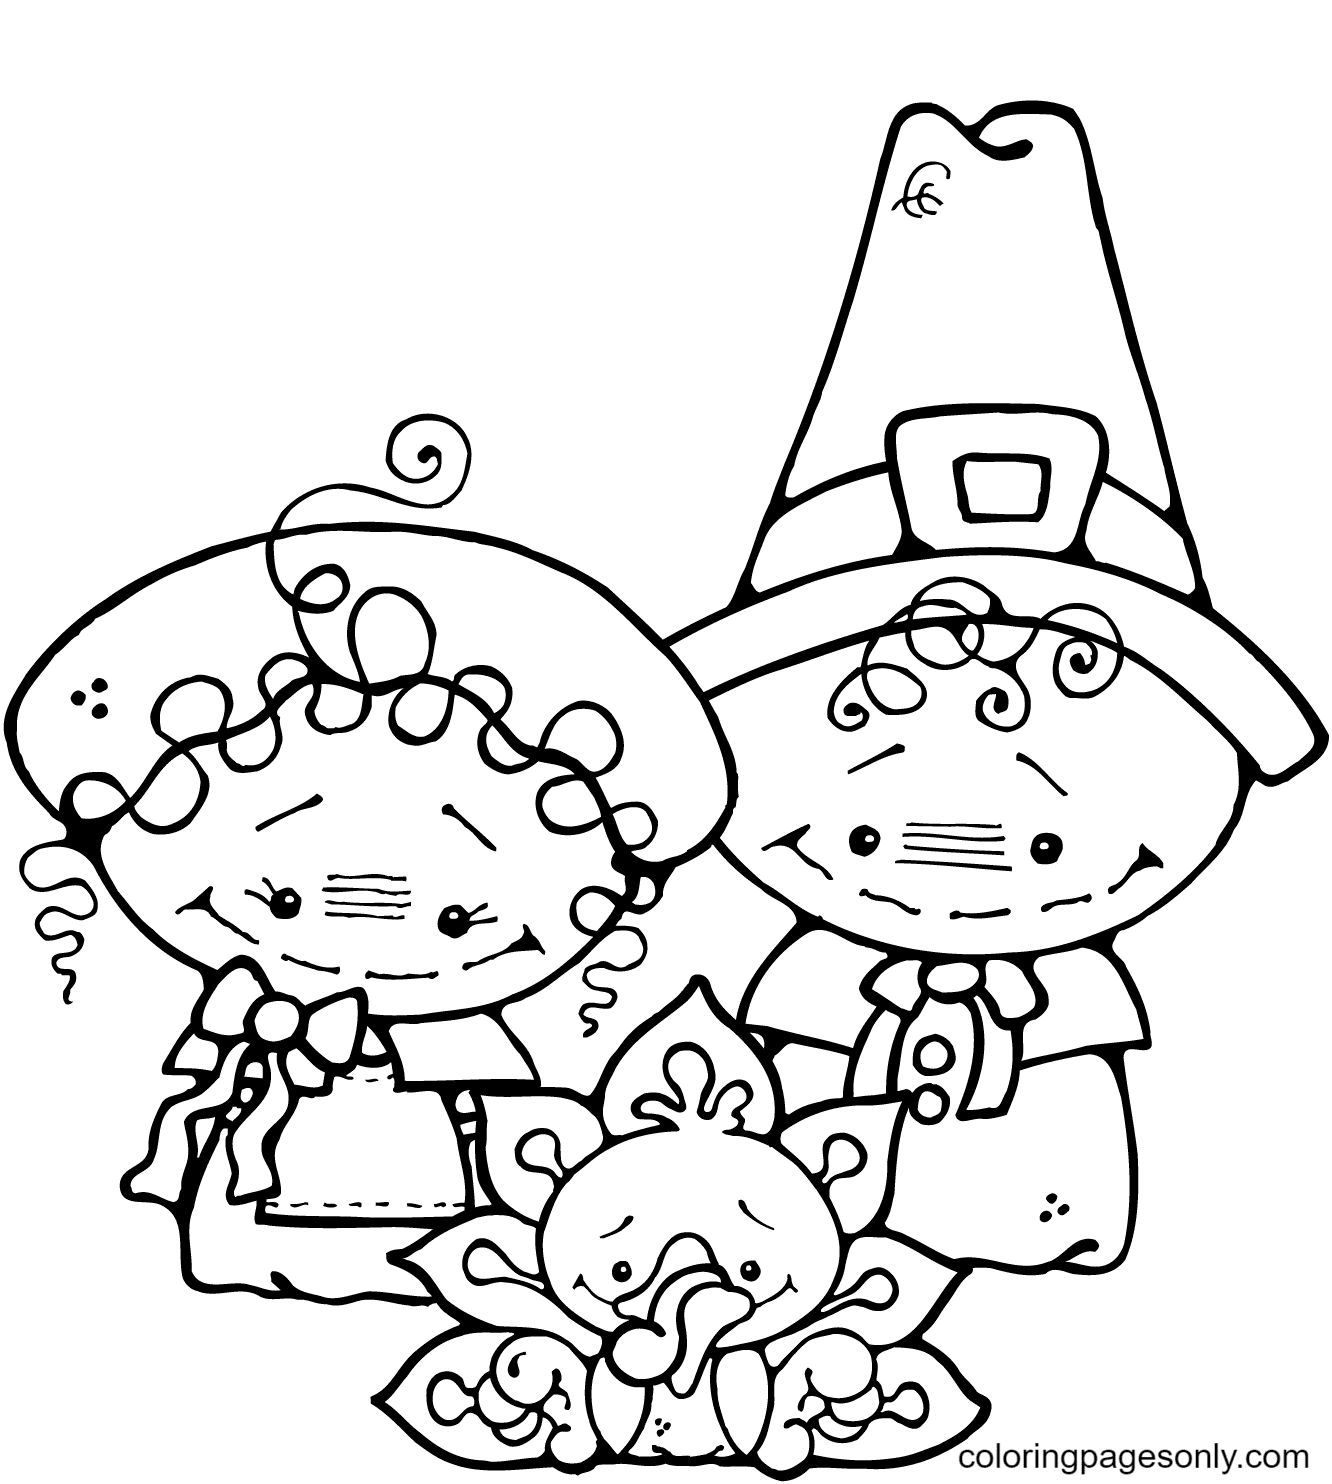 Pilgrim Boy and Girl with Turkey Coloriage